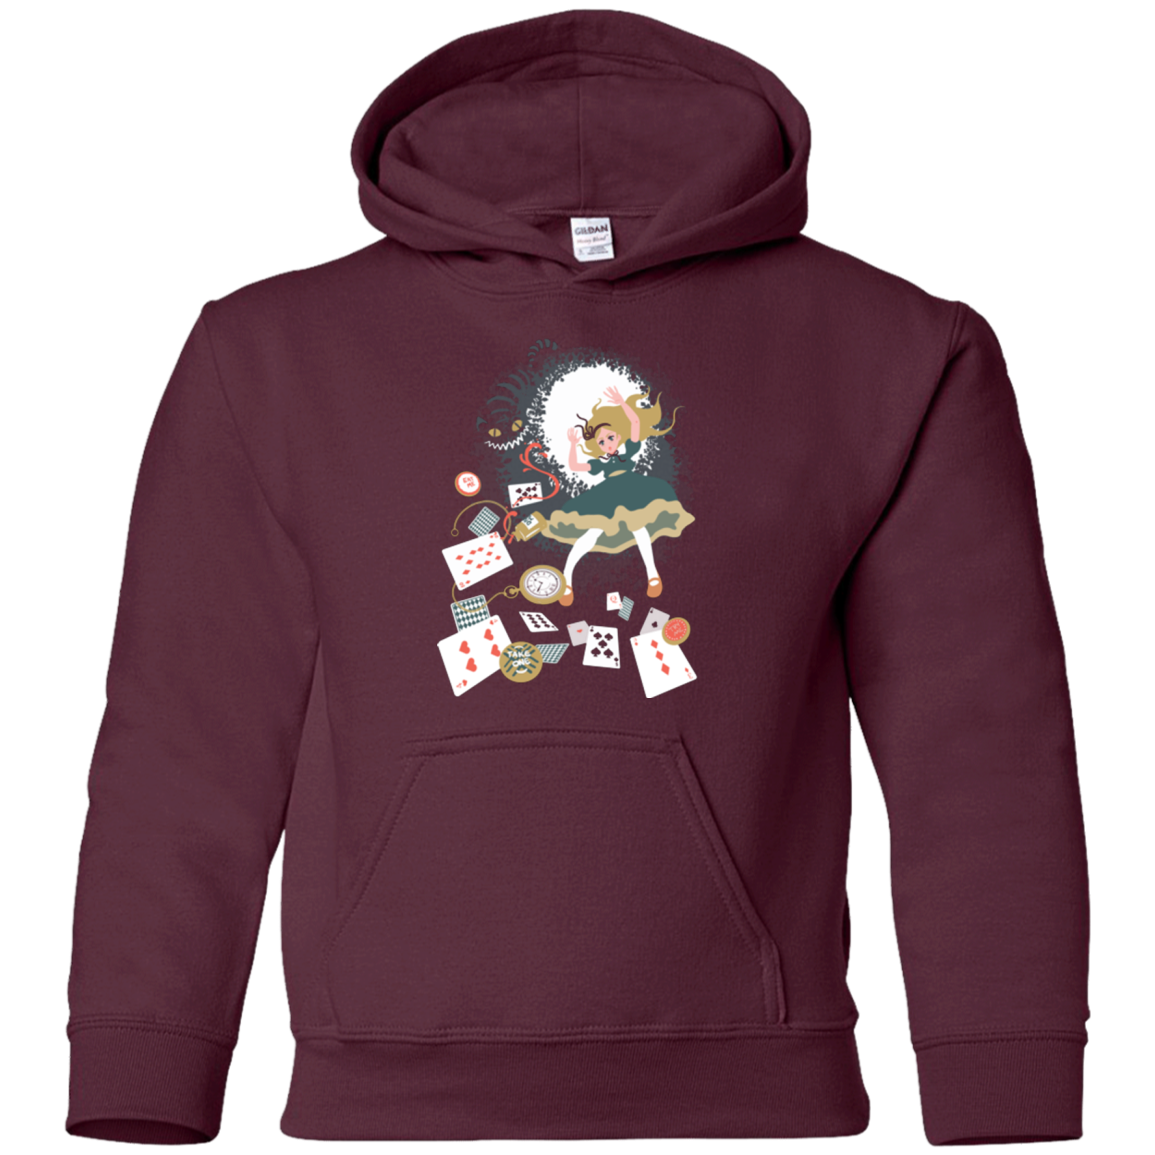 Down the rabbit hole Youth Hoodie